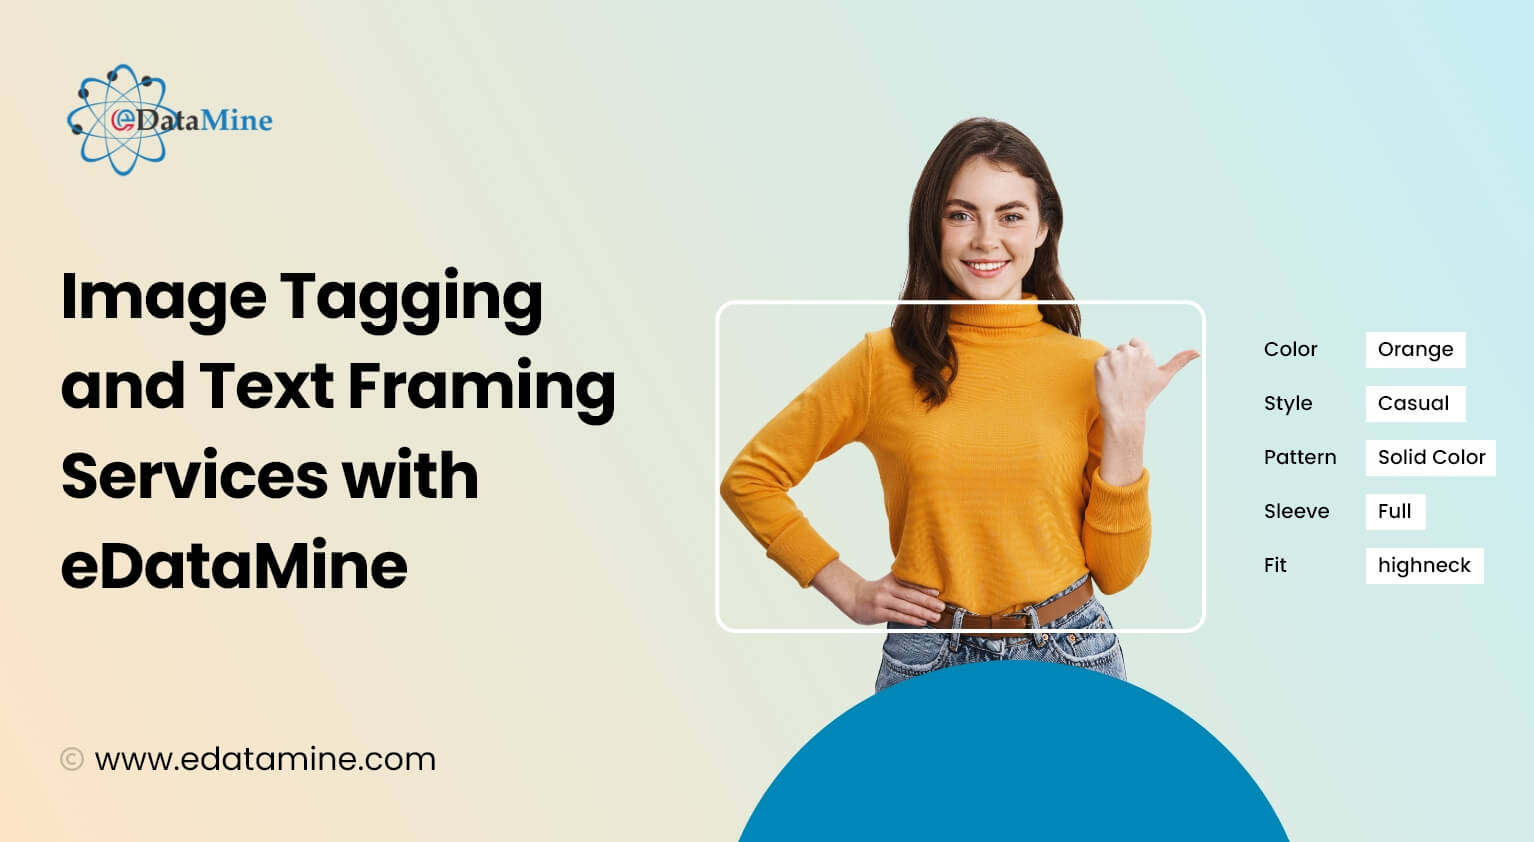 Image Tagging and Text Framing Services with eDataMine